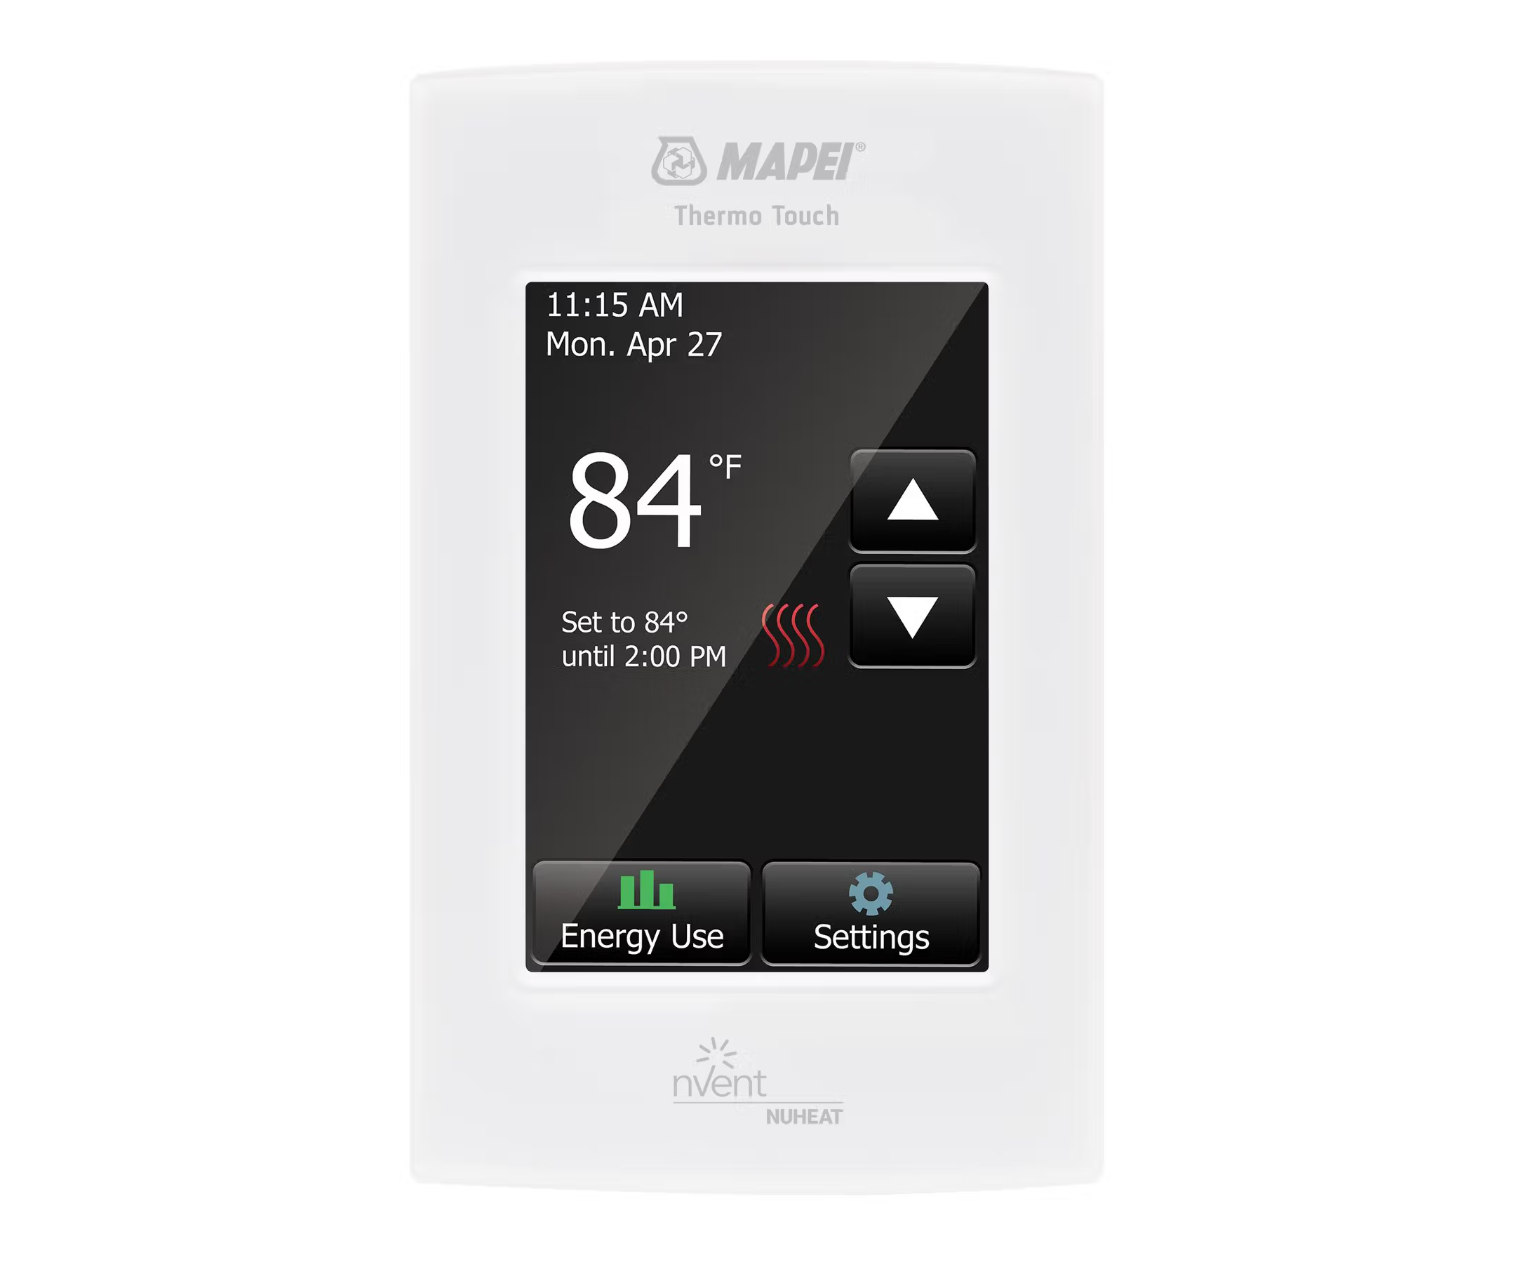 Mapei Mapeheat Thermo Touch Thermostat plancher chauffant programmable (SKU: 2855201)